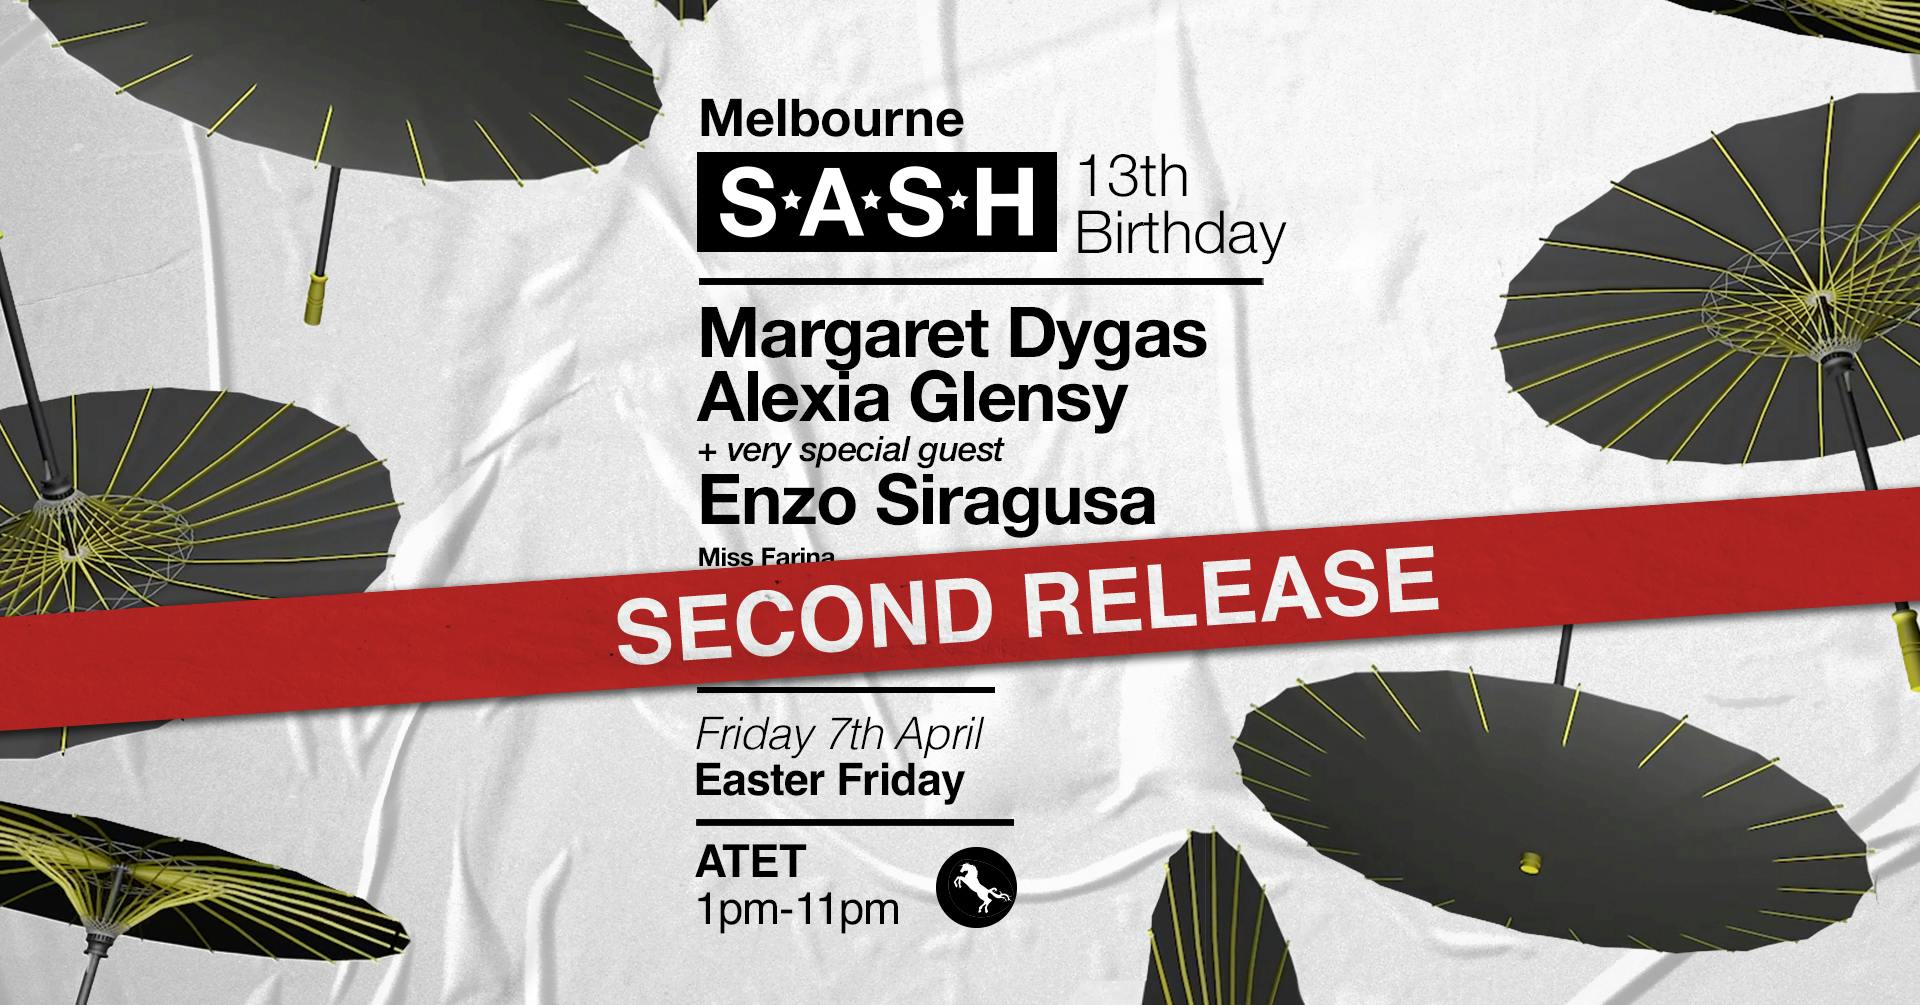 ★ S*A*S*H Melbourne 13th Birthday ★ Good Friday ★ Margaret Dygas ★ Alexia Glensy ★